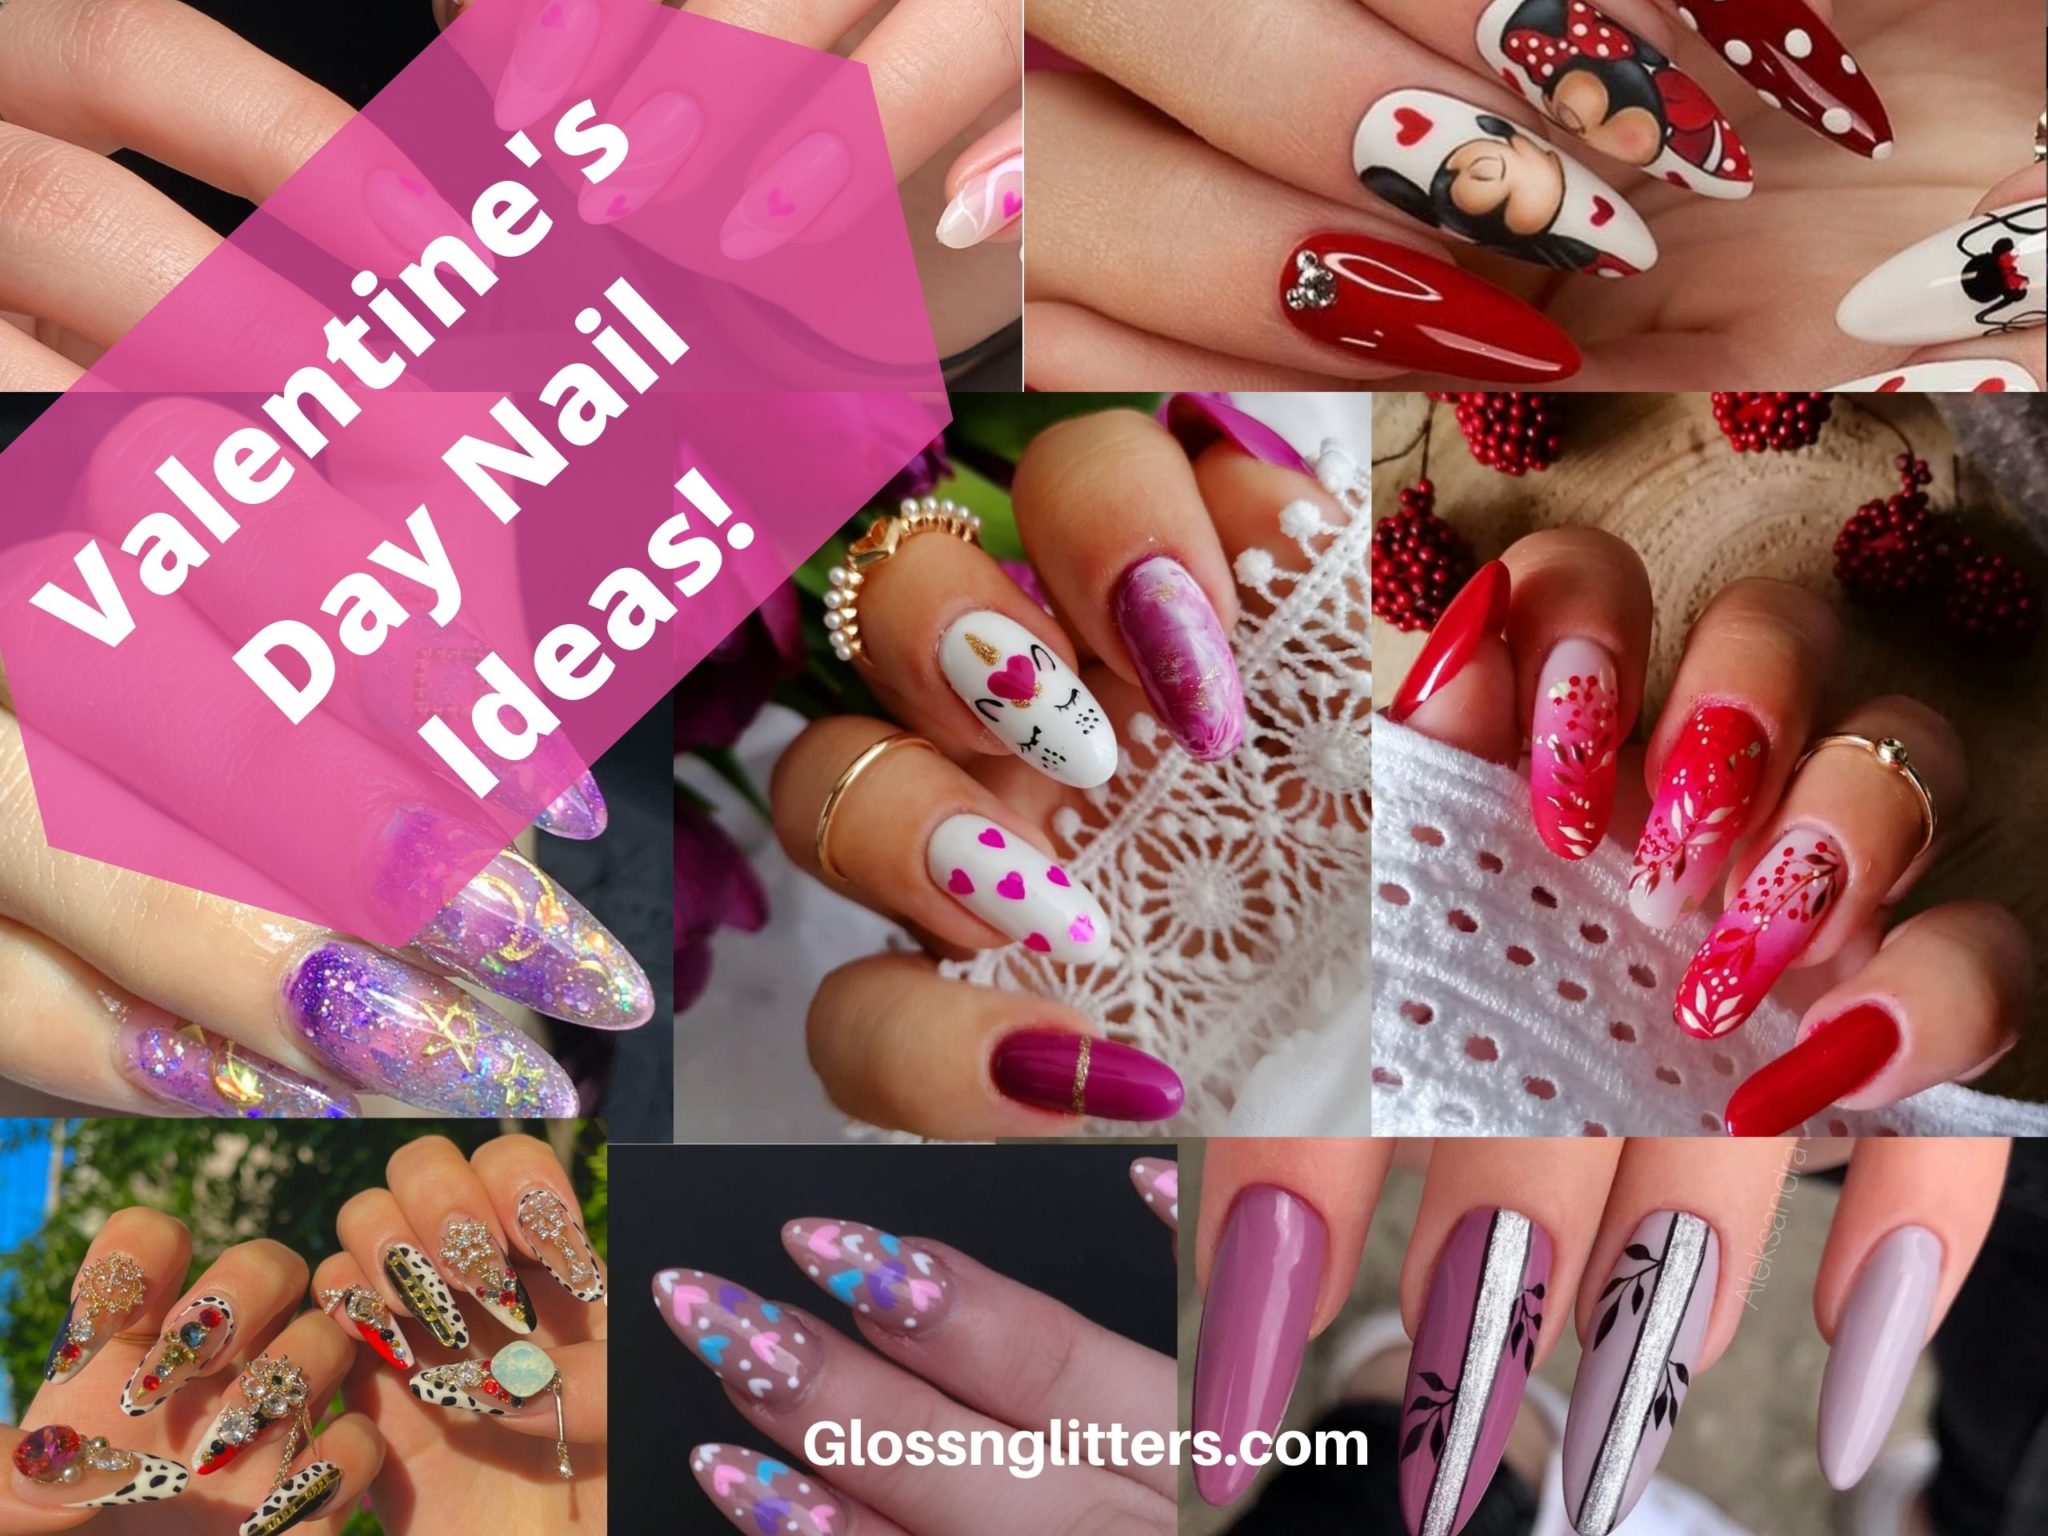 20 Cute And Easy Valentine's Day Nail Ideas - Glossnglitters